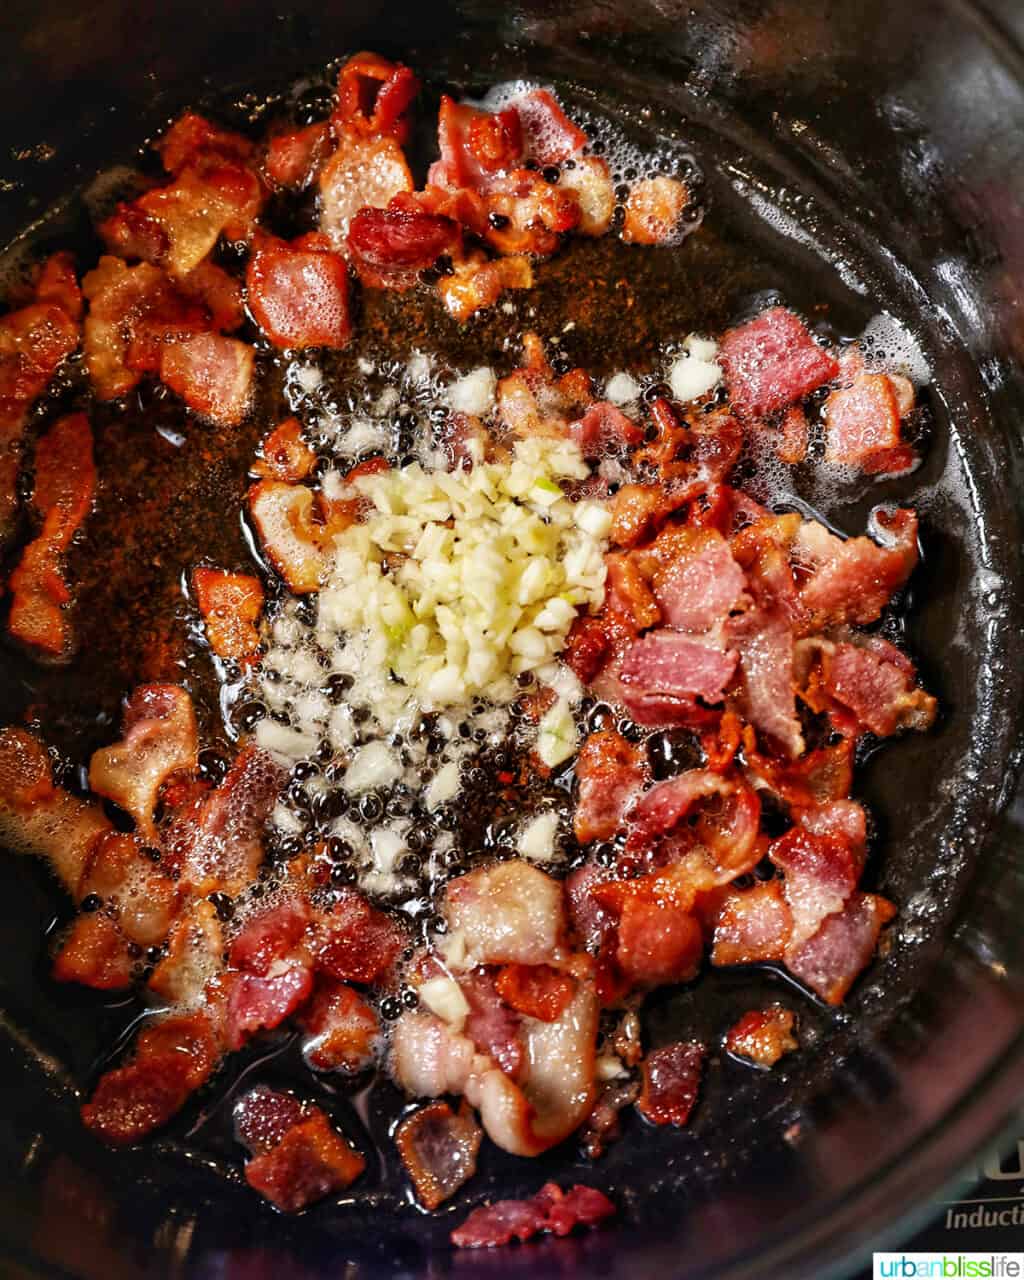 adding garlic to cooked bacon